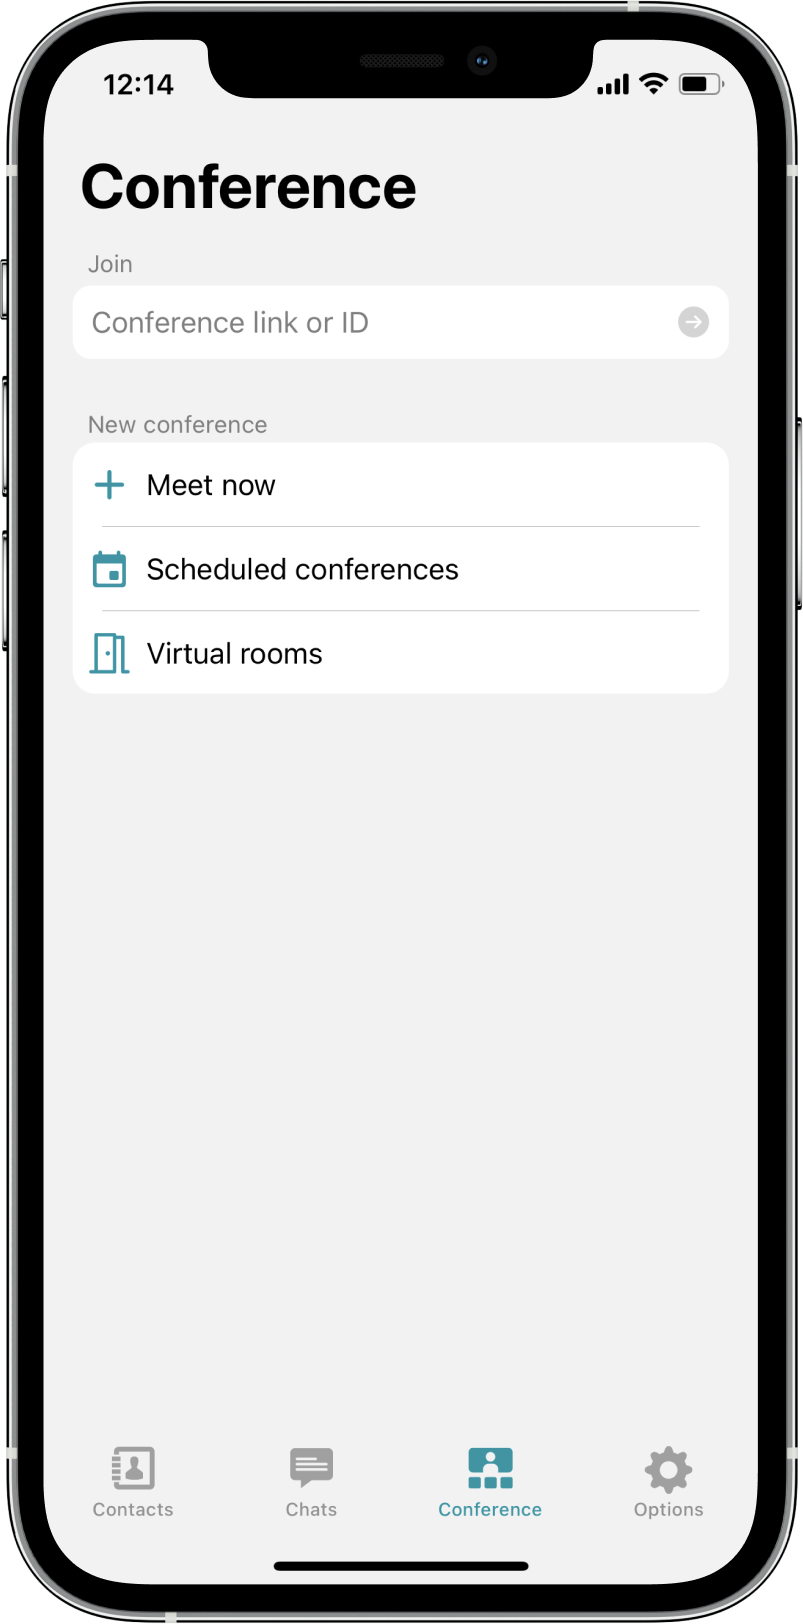 TrueConf 3.3 for iOS: new UI, Smart meeting mode, offline access to chats, contacts, and call history 17